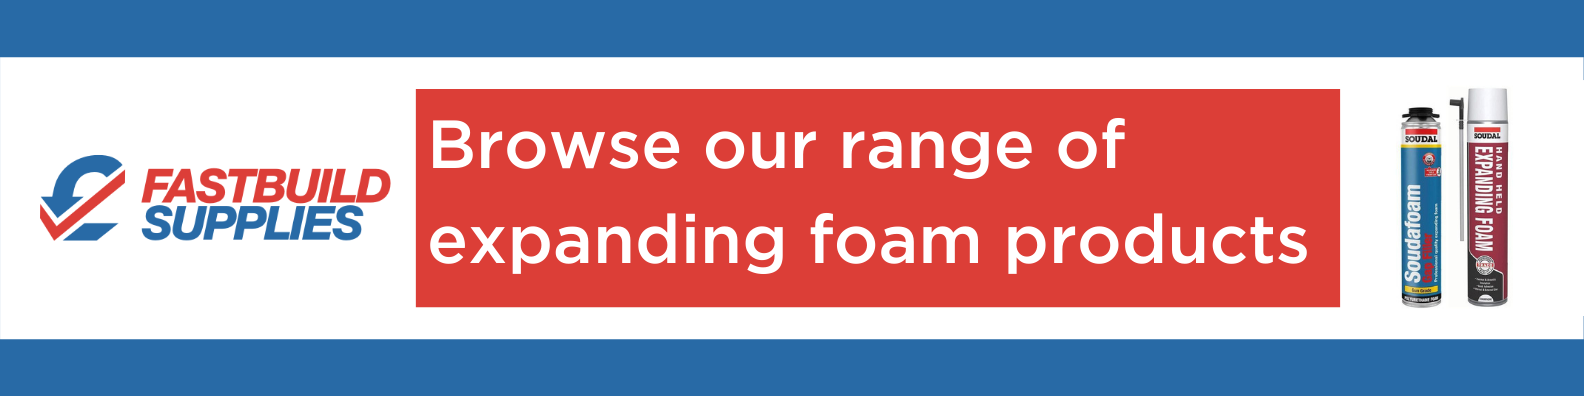 Browse our range of expanding foam products